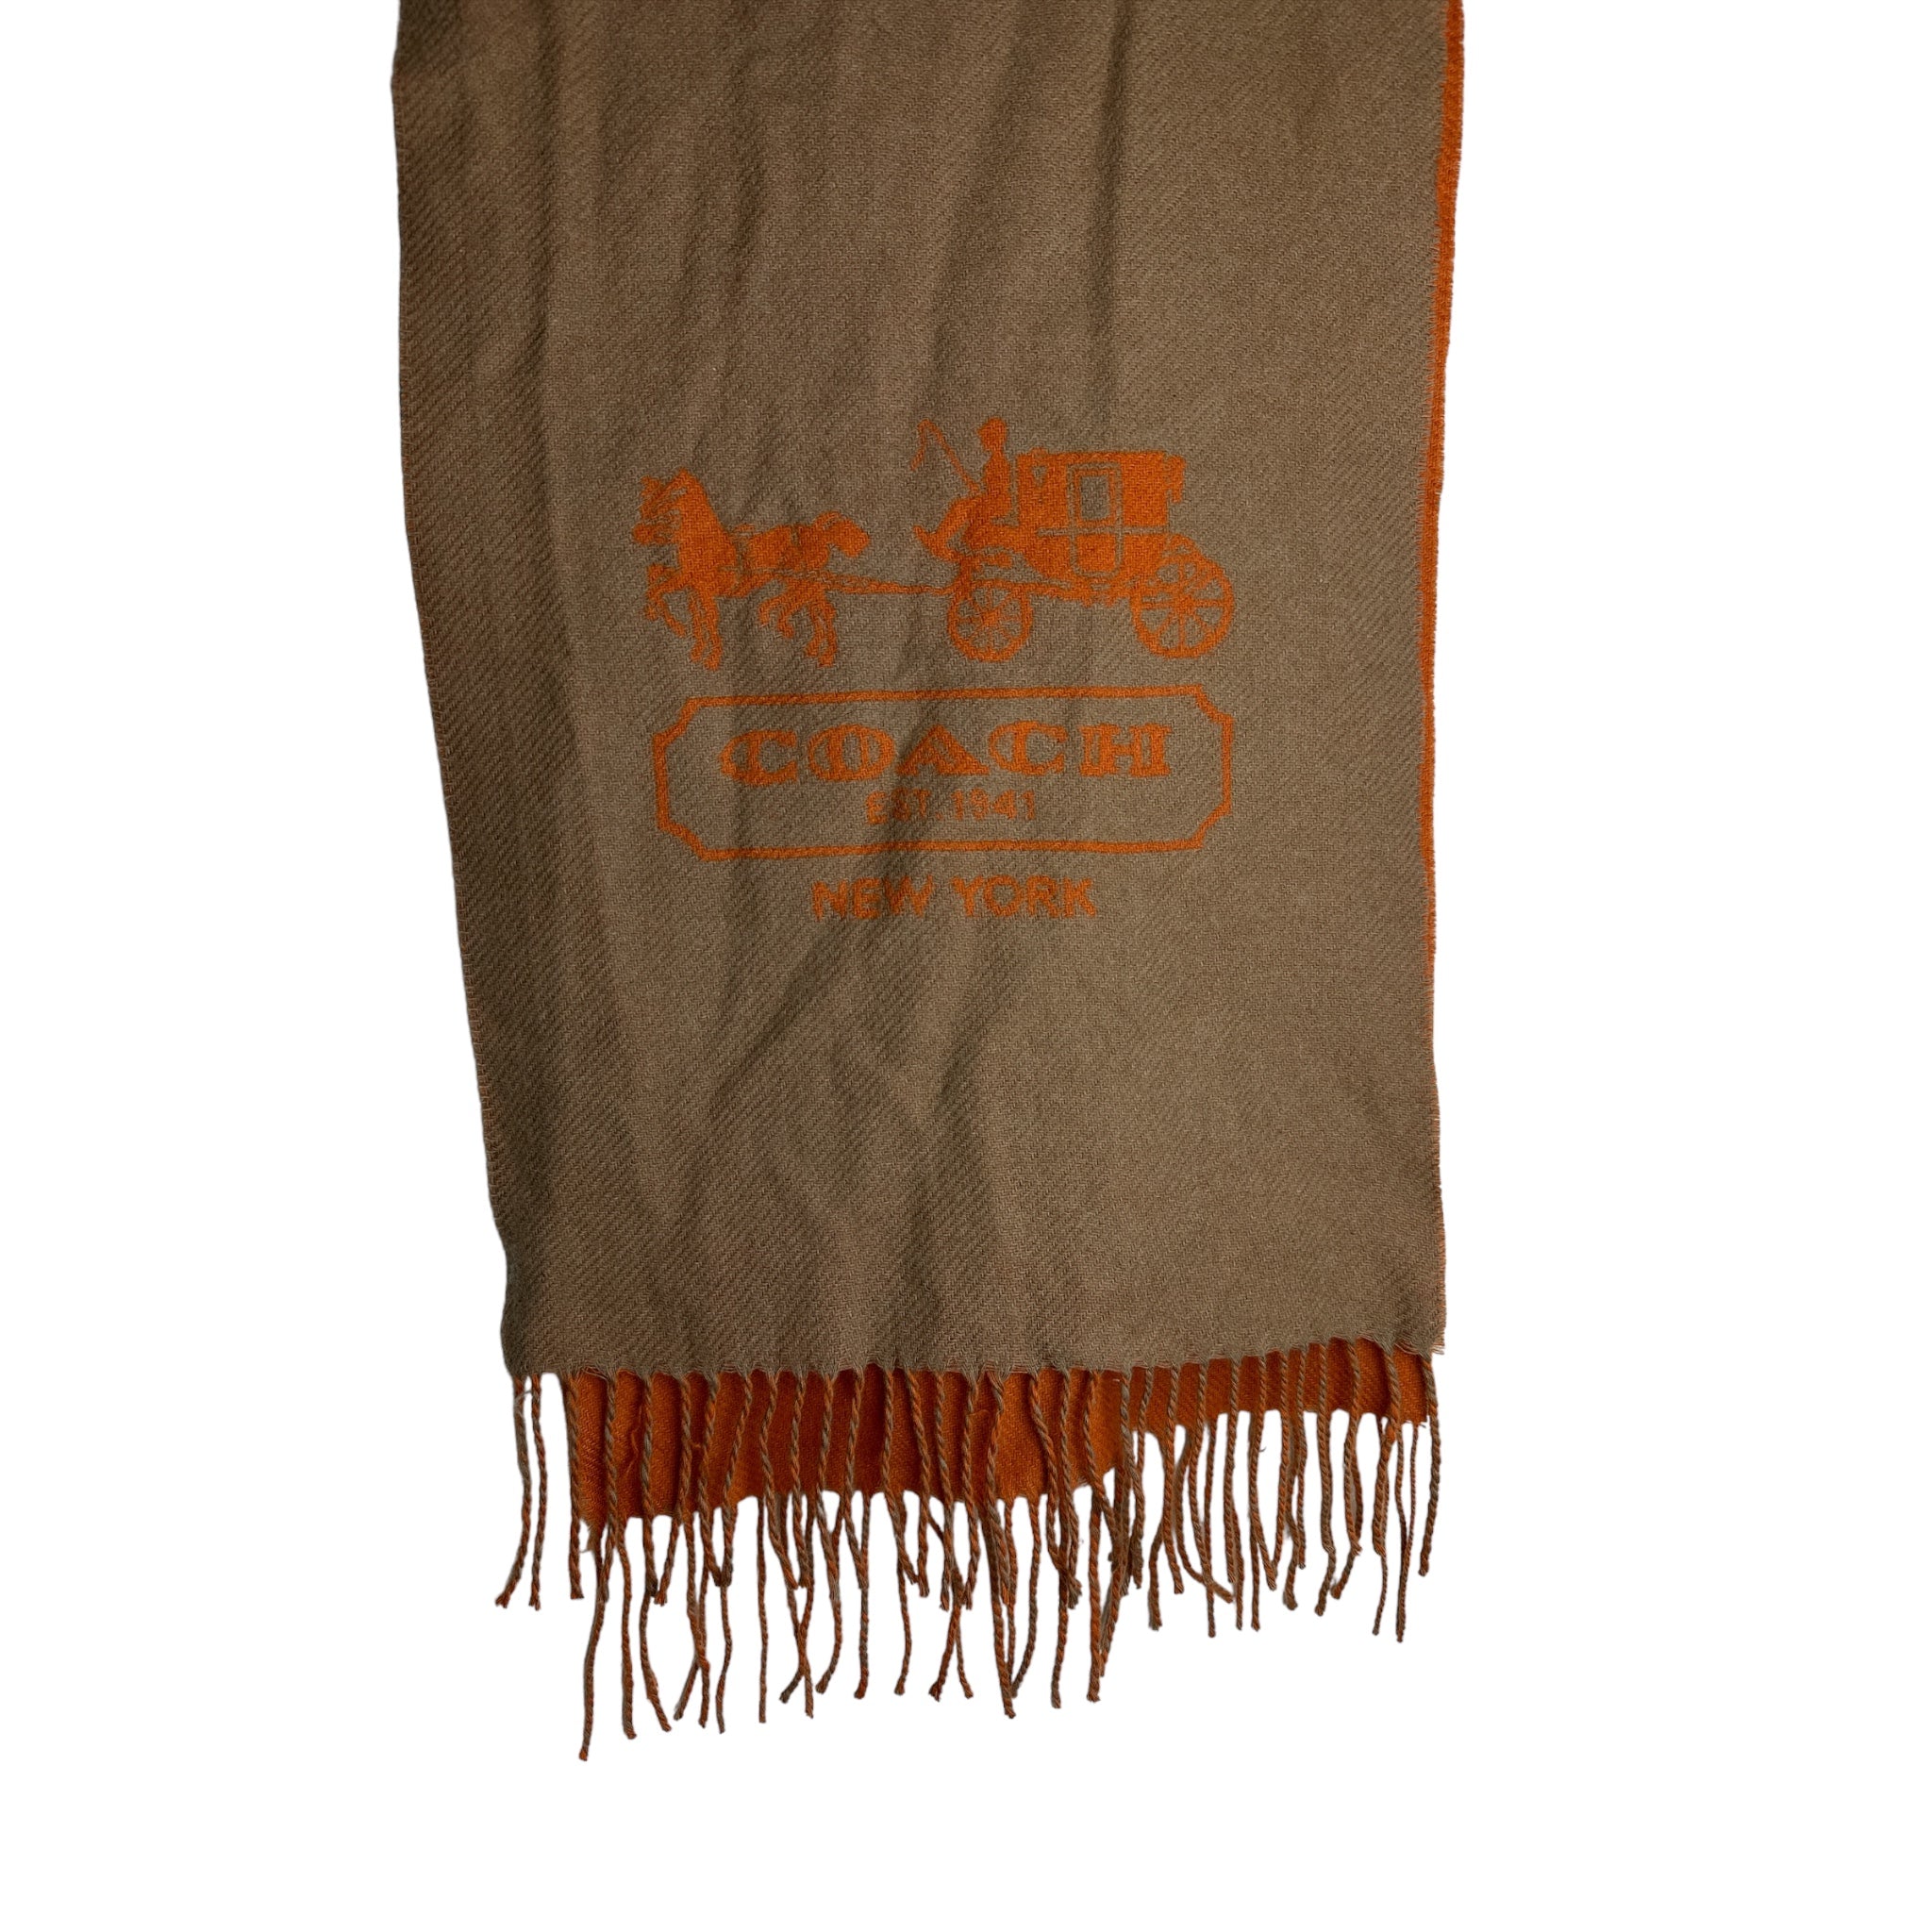 Cashmere COACH Scarf in Burnt Orange and Light Brown